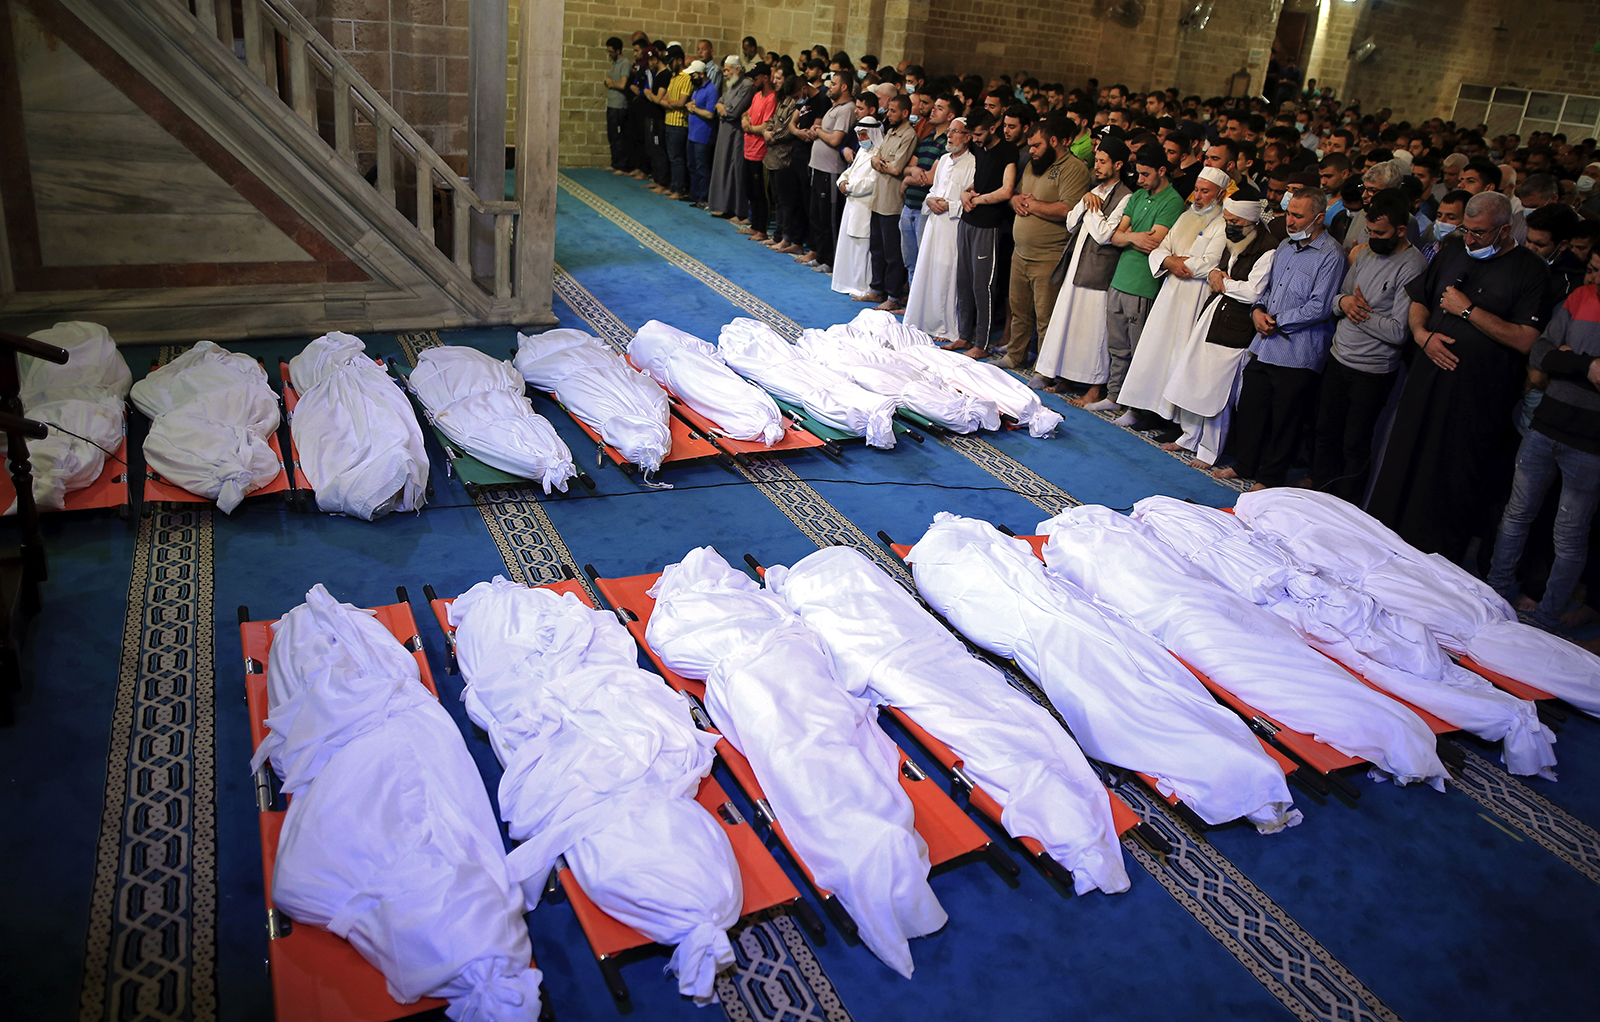 Mourners pray over the bodies of 17 Palestinians who were killed in overnight Israeli airstrikes in Gaza City, Sunday, May 16, 2021. (AP Photo/Sanad Latifa)